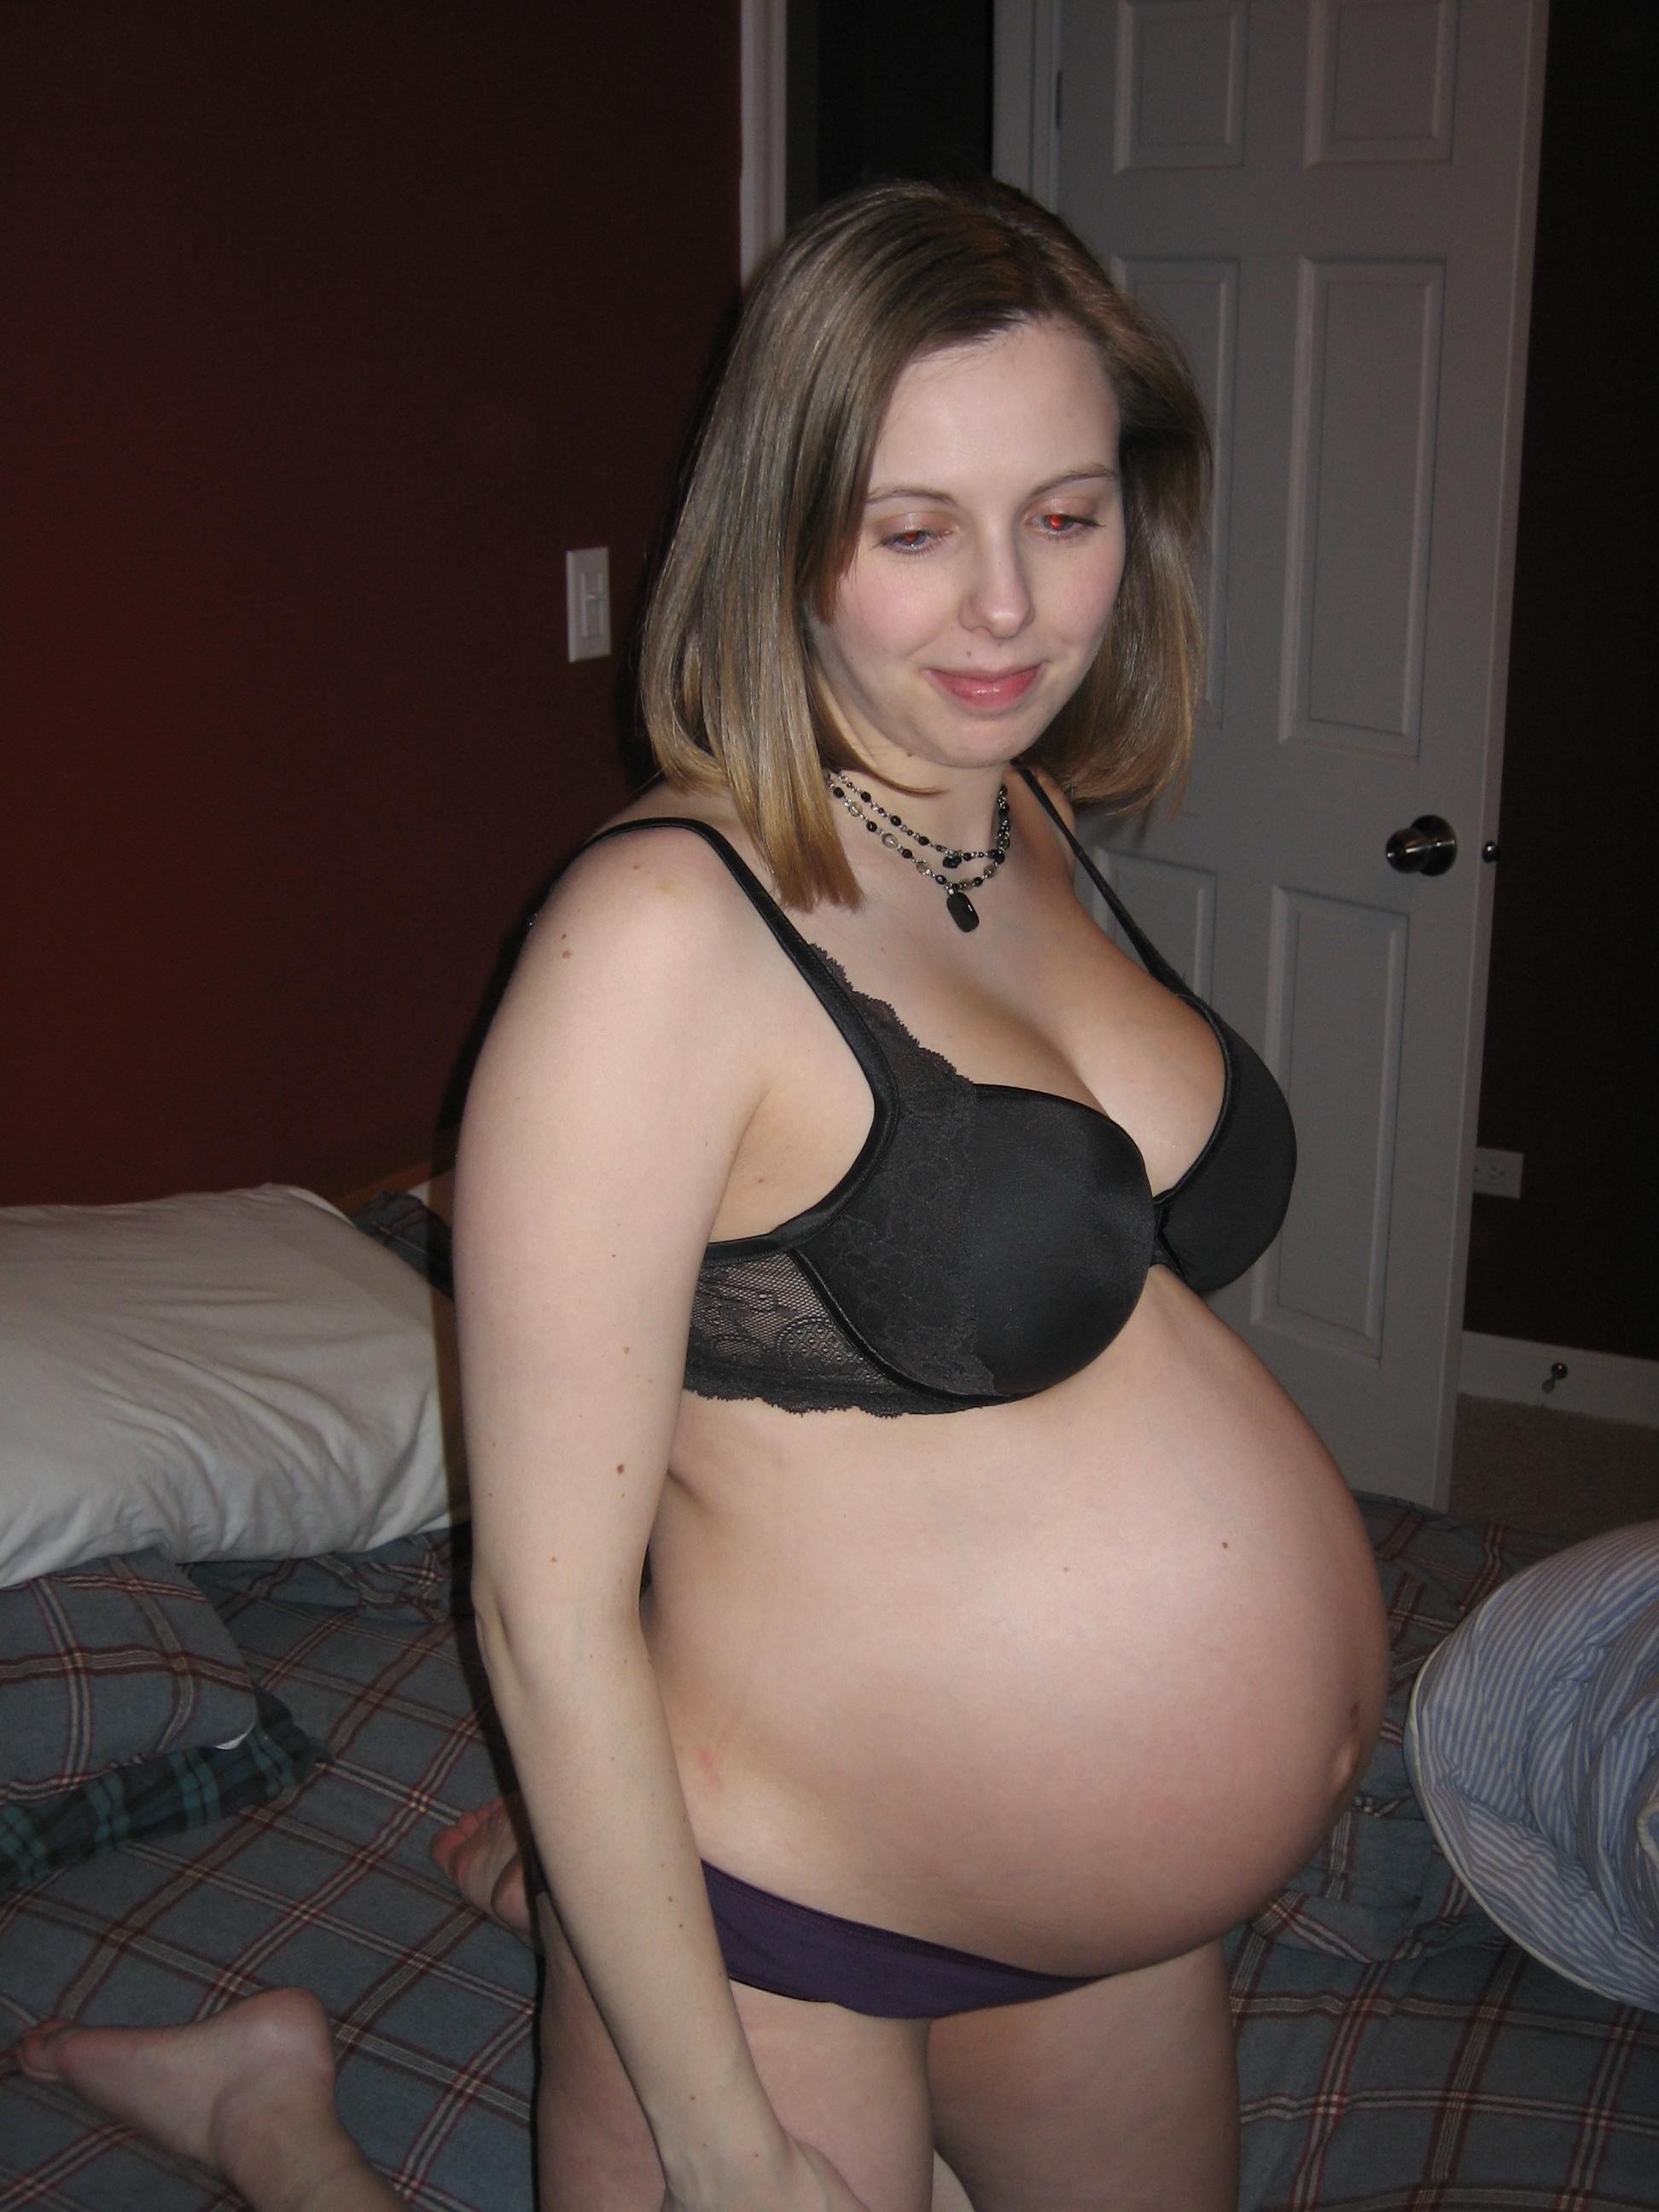 Amateur Pregnant Mature Wife with Tramp Stamp Wearing Pink Panties pic photo photo